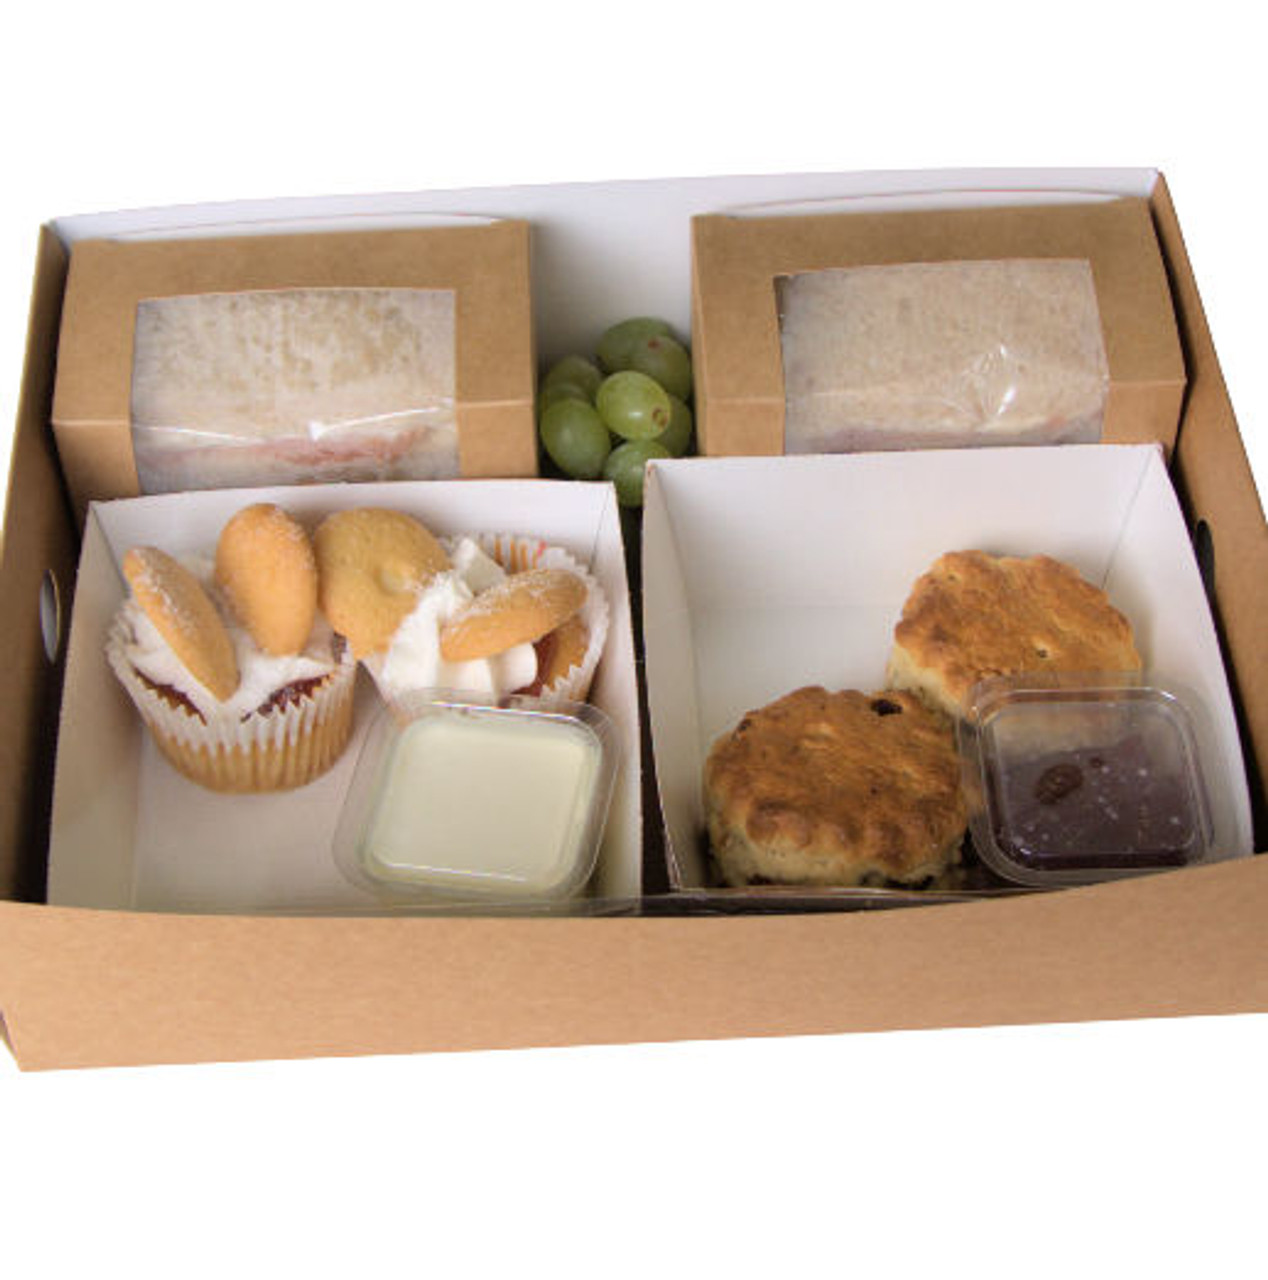 Pack of 50 Afternoon Tea / Picnic TRAY for 2 includes Sandwich boxes, Trays, Cutlery, portion pots and Self Seal Bag